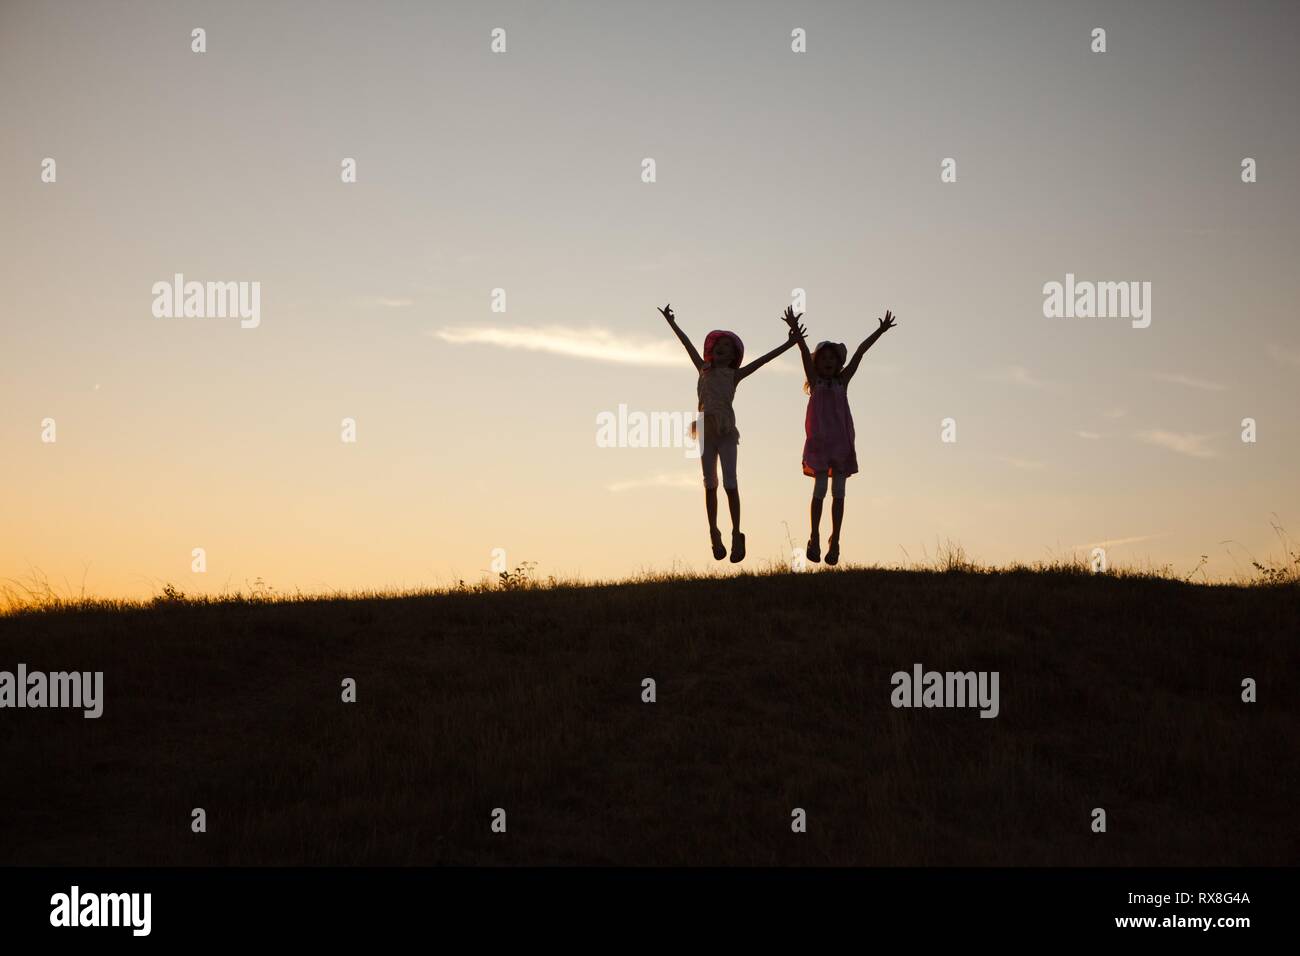 Two children jumped and raised hands up. Captured emotion during sunset after summer day. Stock Photo